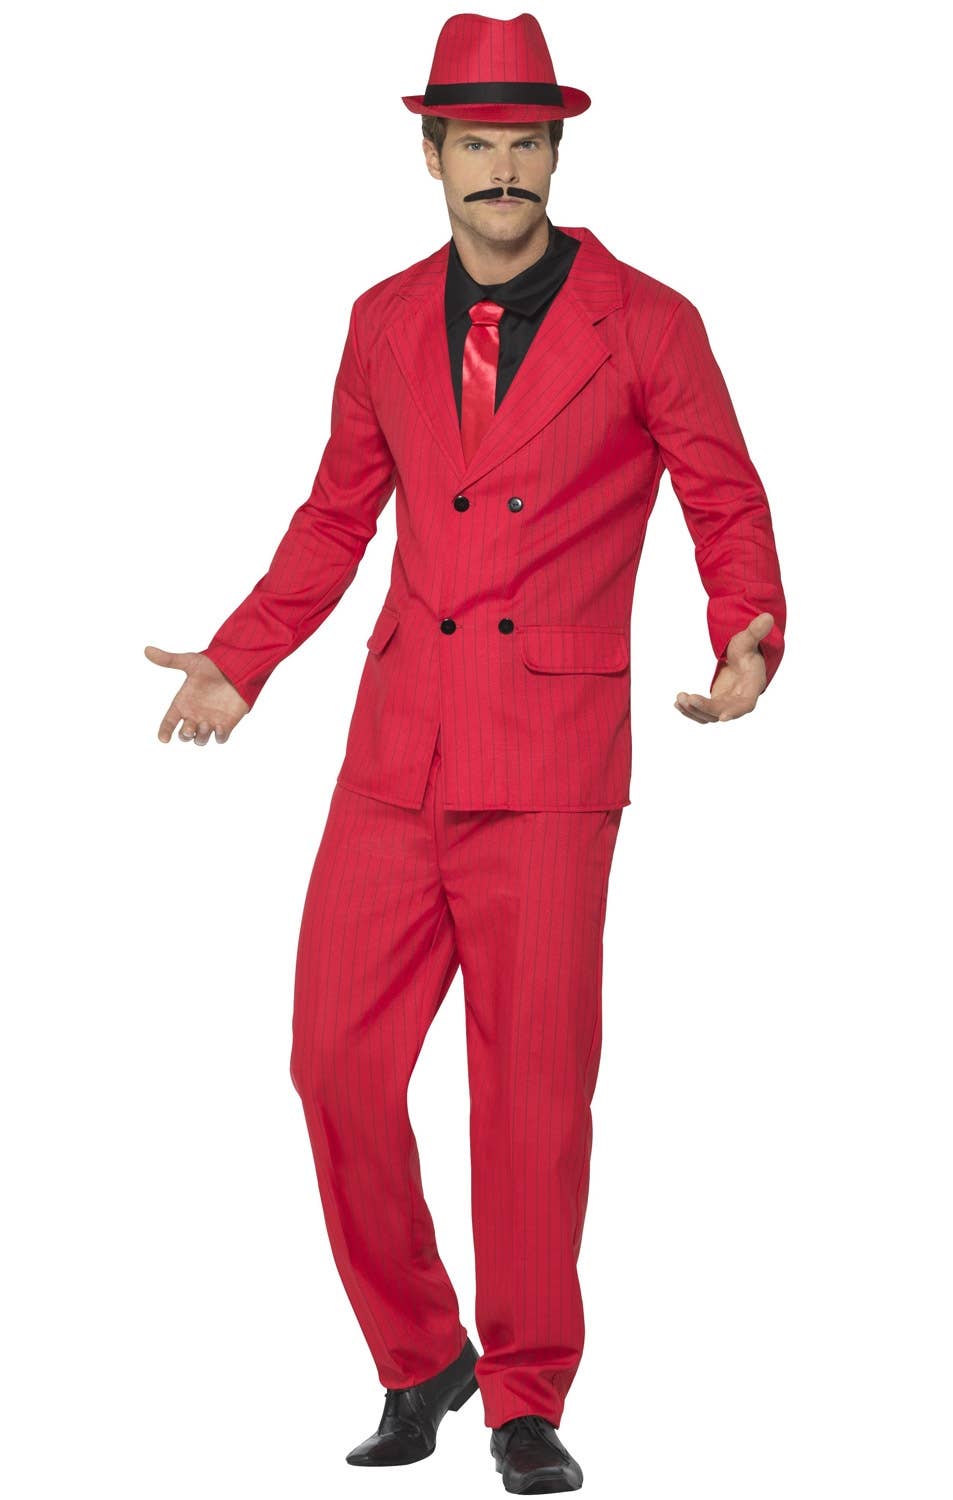 Men's Red With Black Pinstripes Zoot Suit Gangster 1920's Costume Alt View